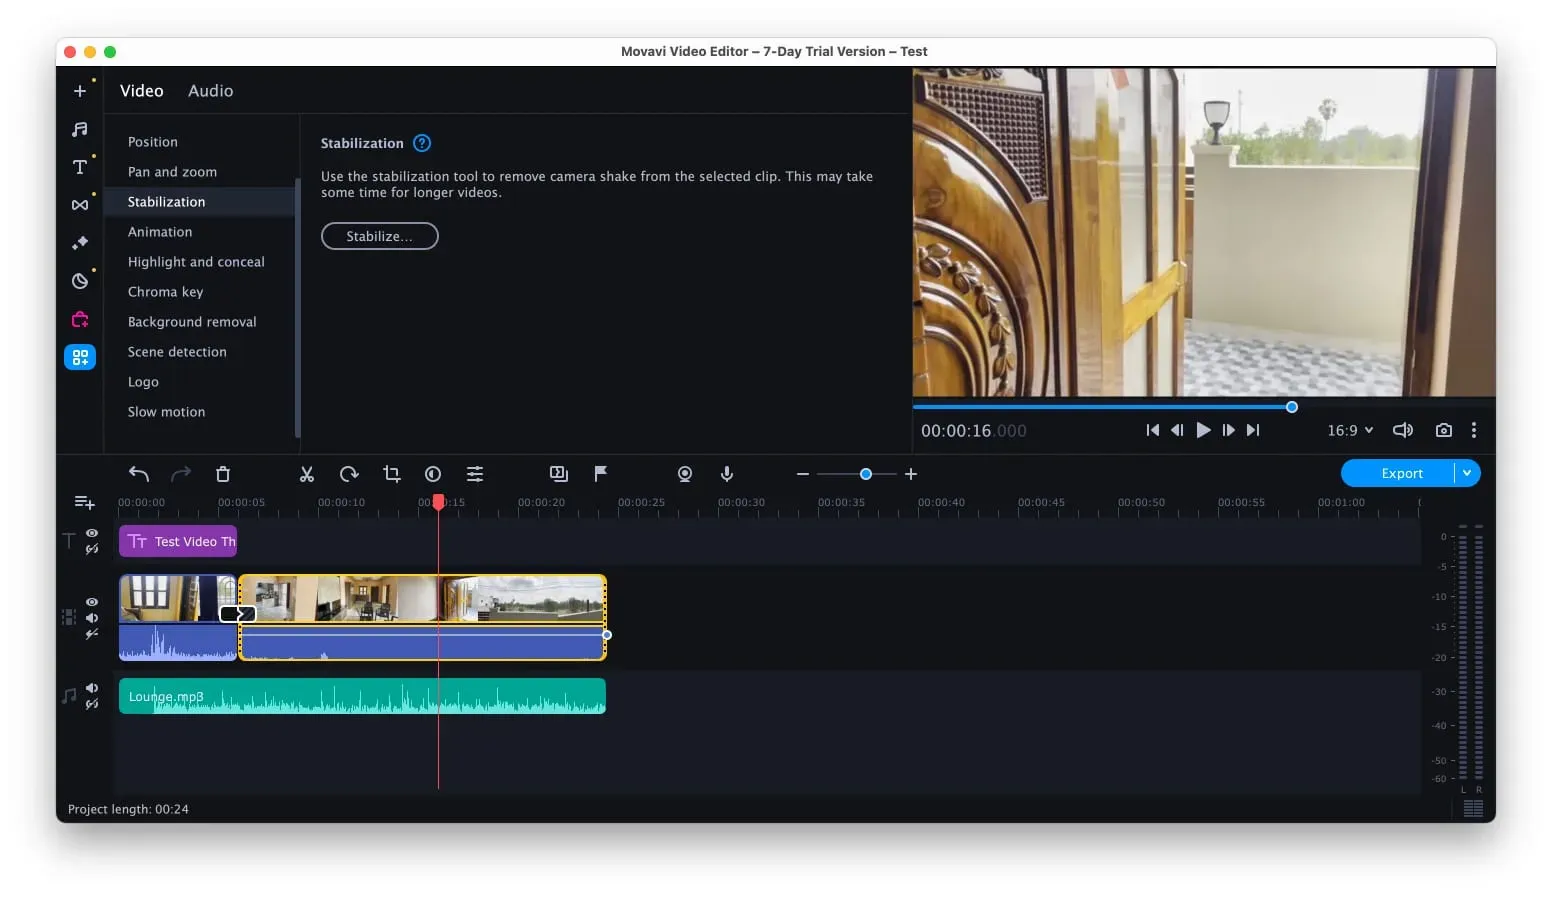 Movavi Video Editor Editing Video and Audio clips in the Timeline